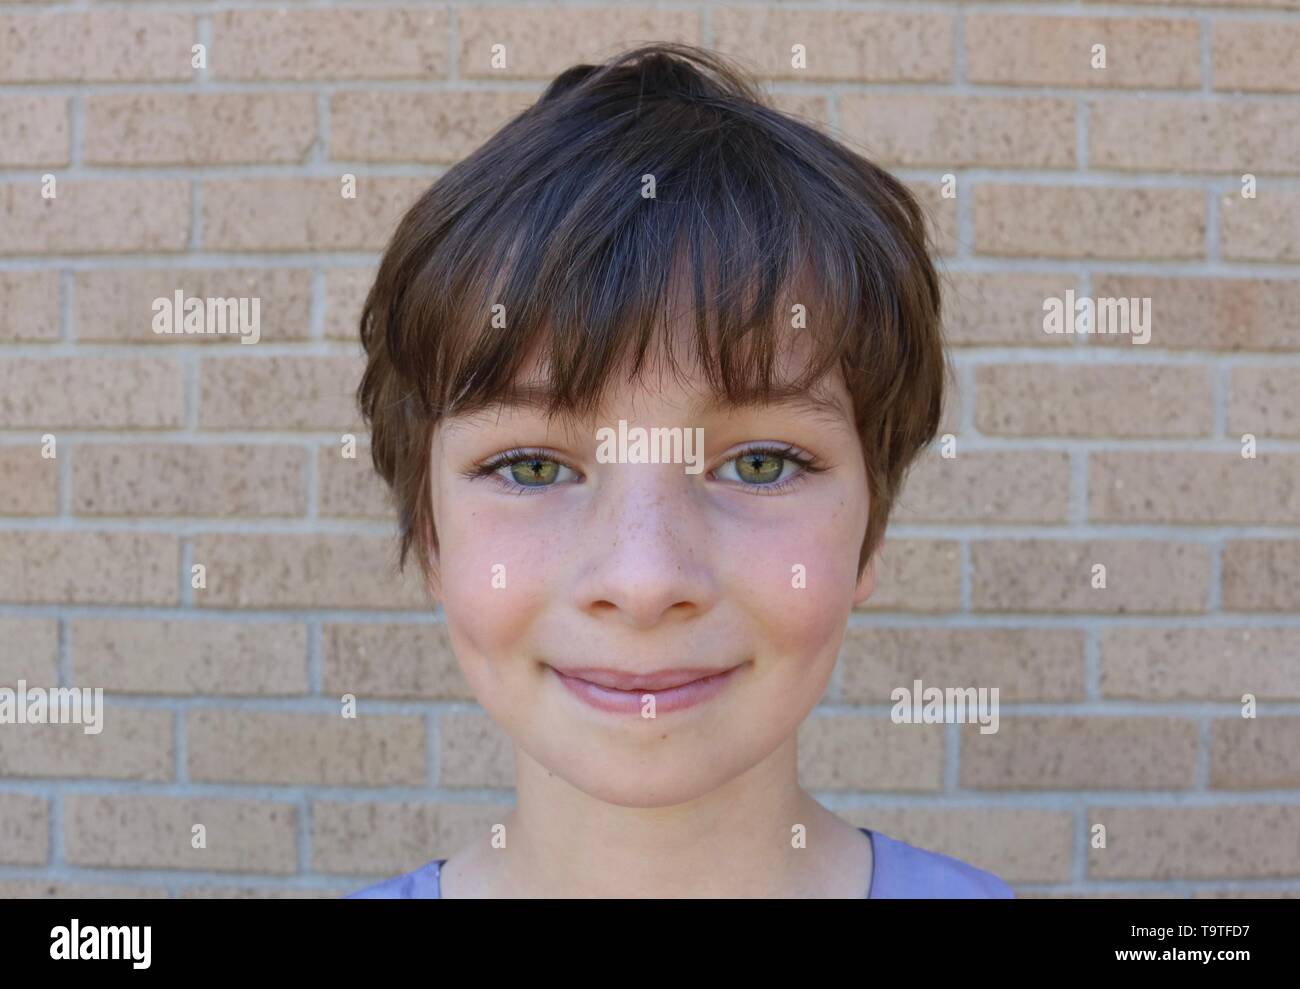 Face of young child with stunning hazel eyes, short brown pixie hair and dimples Stock Photo